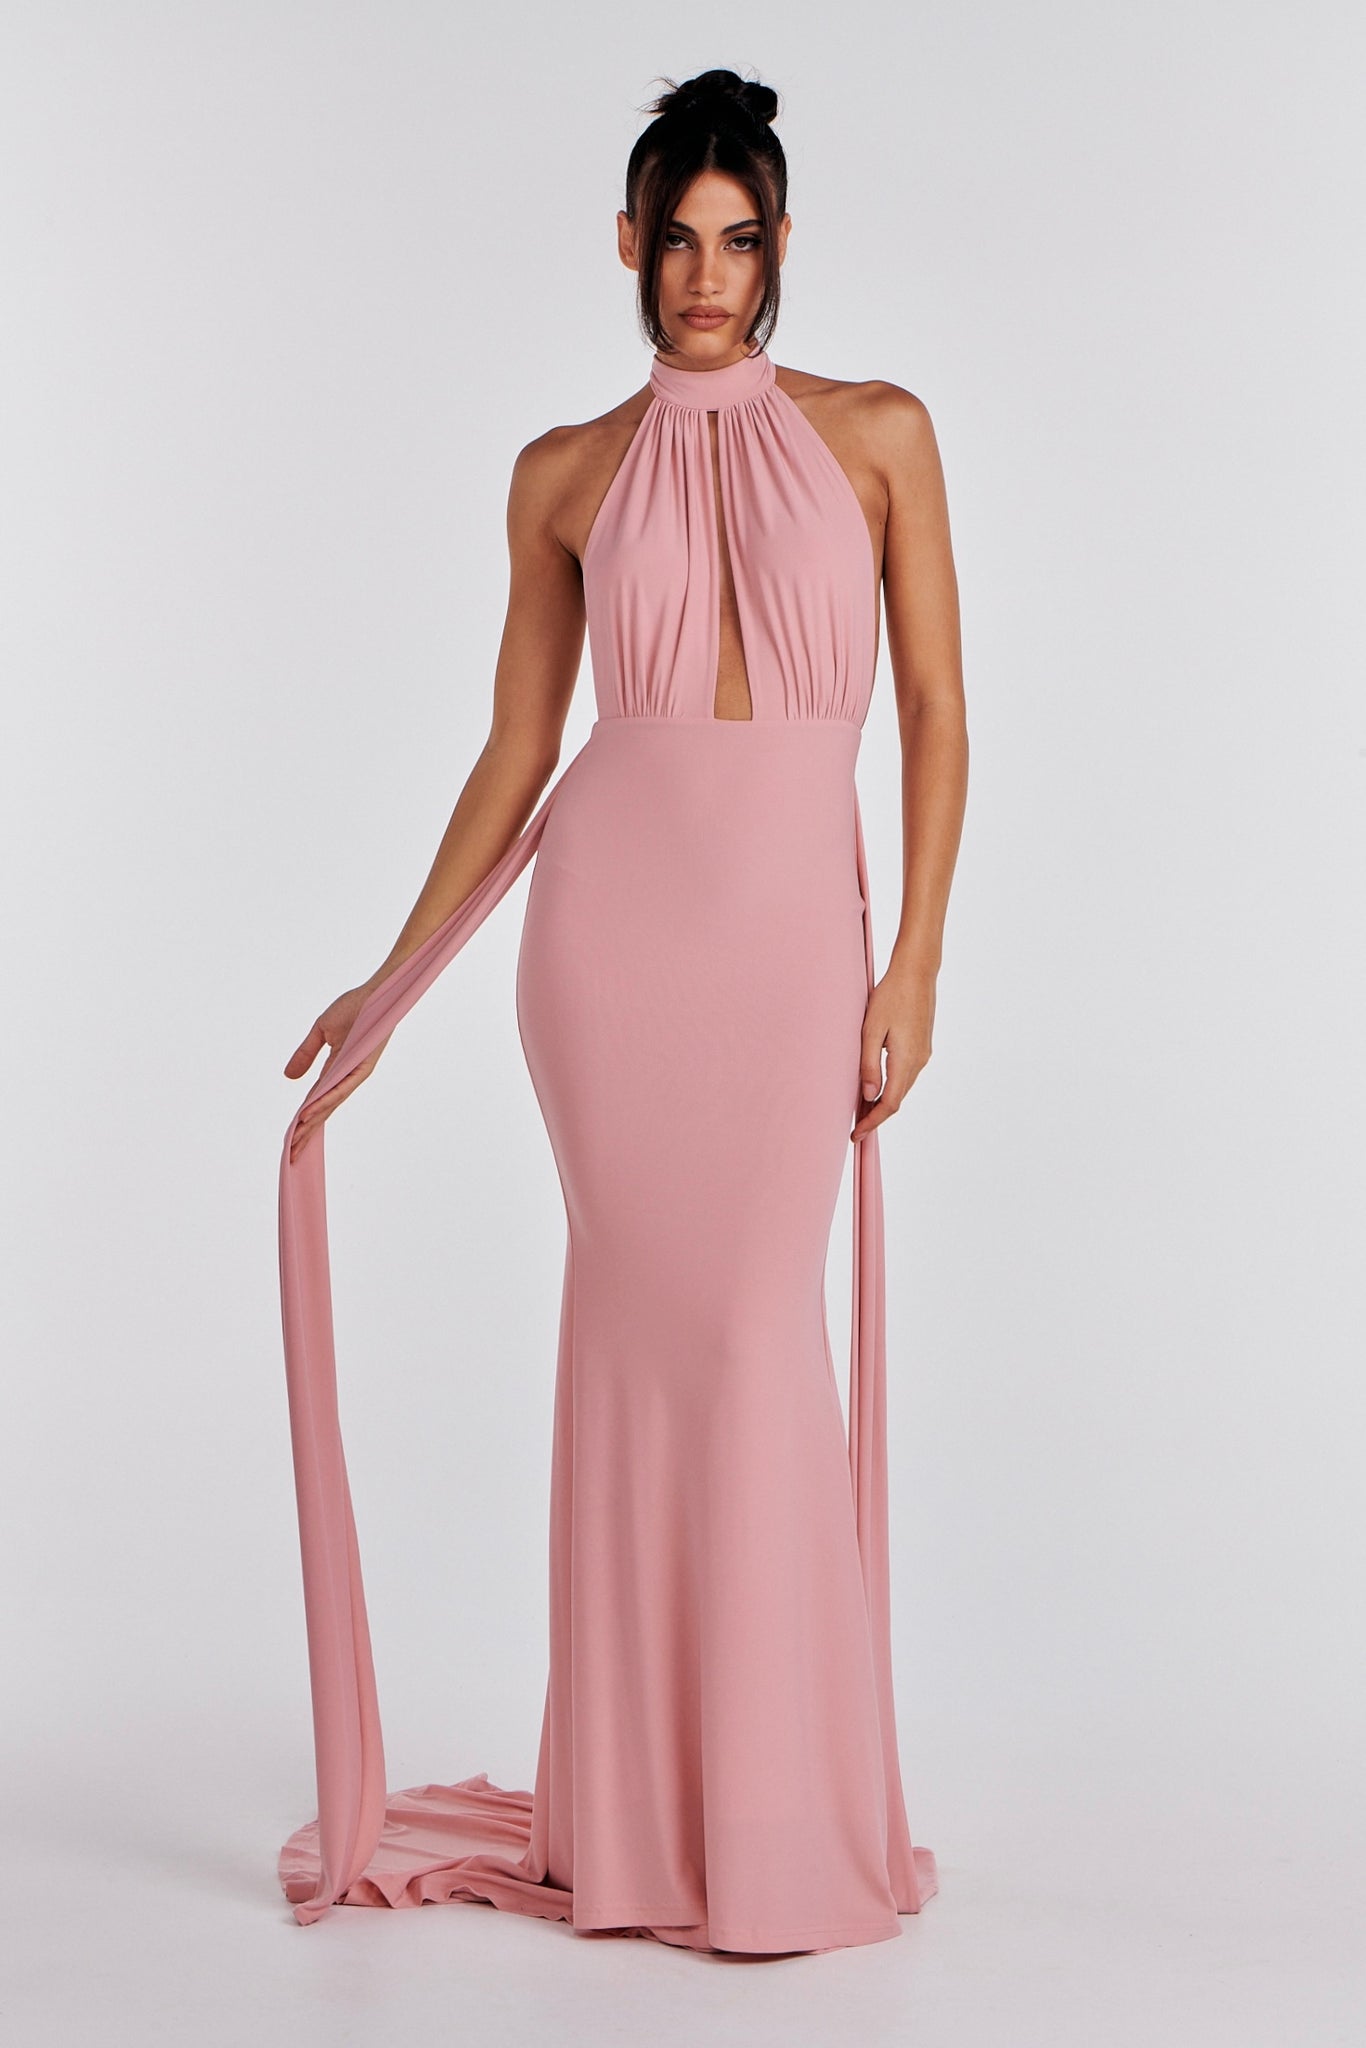 MÉLANI The Label LUCIA Blush Keyhole Neckline Backless Bridesmaid Formal Gown